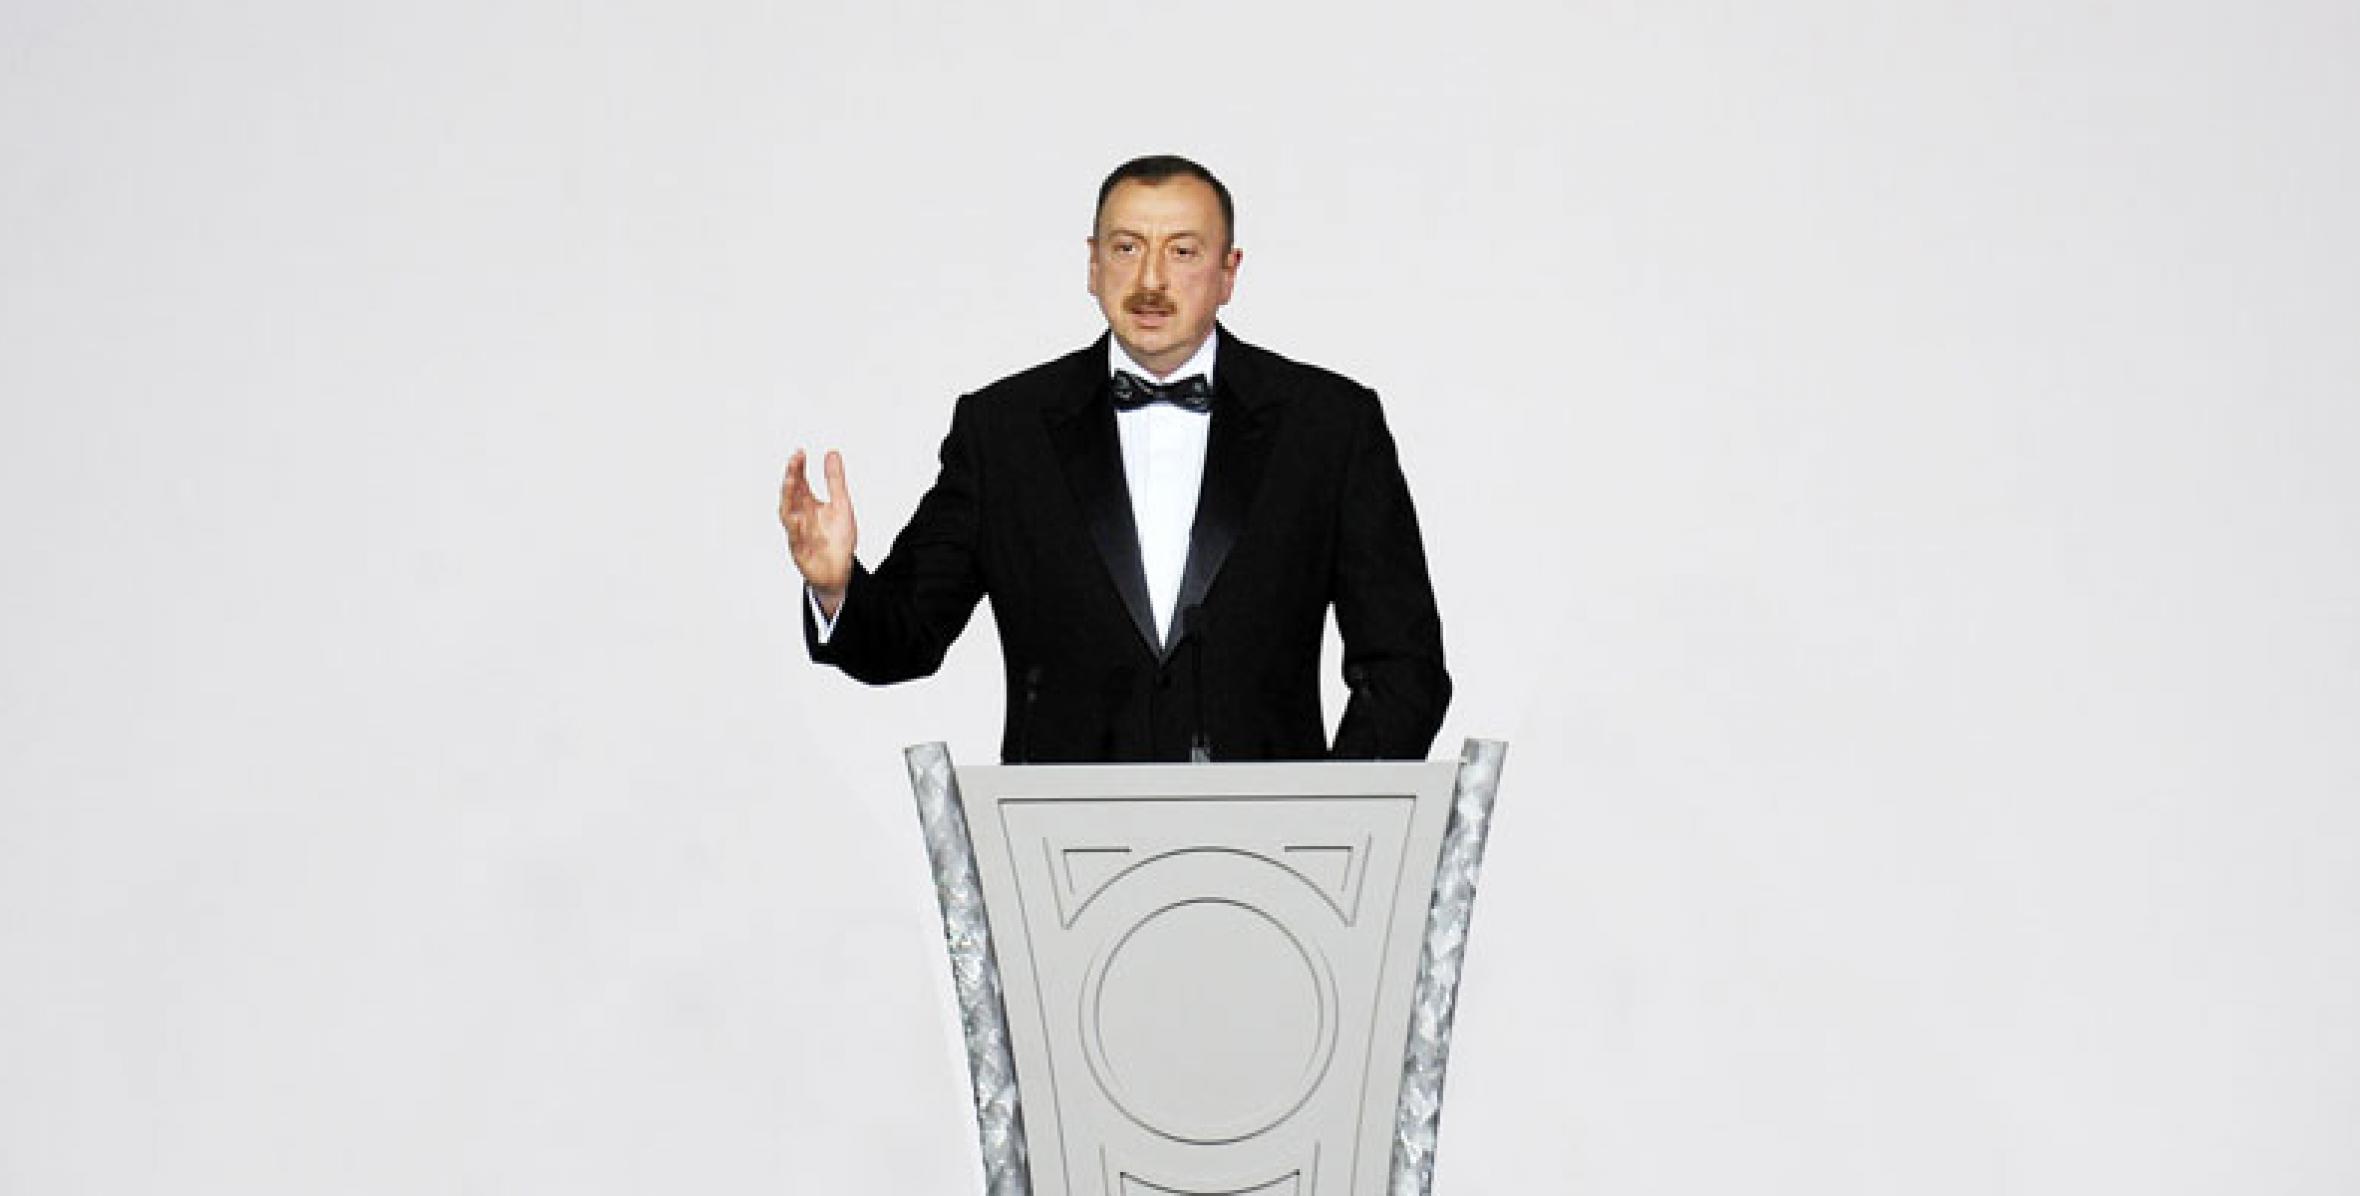 Ilham Aliyev attended the ceremonial reception held in connection with the 87th birthday of national leader Heydar Aliyev and the 6th anniversary of Heydar Aliyev Foundation